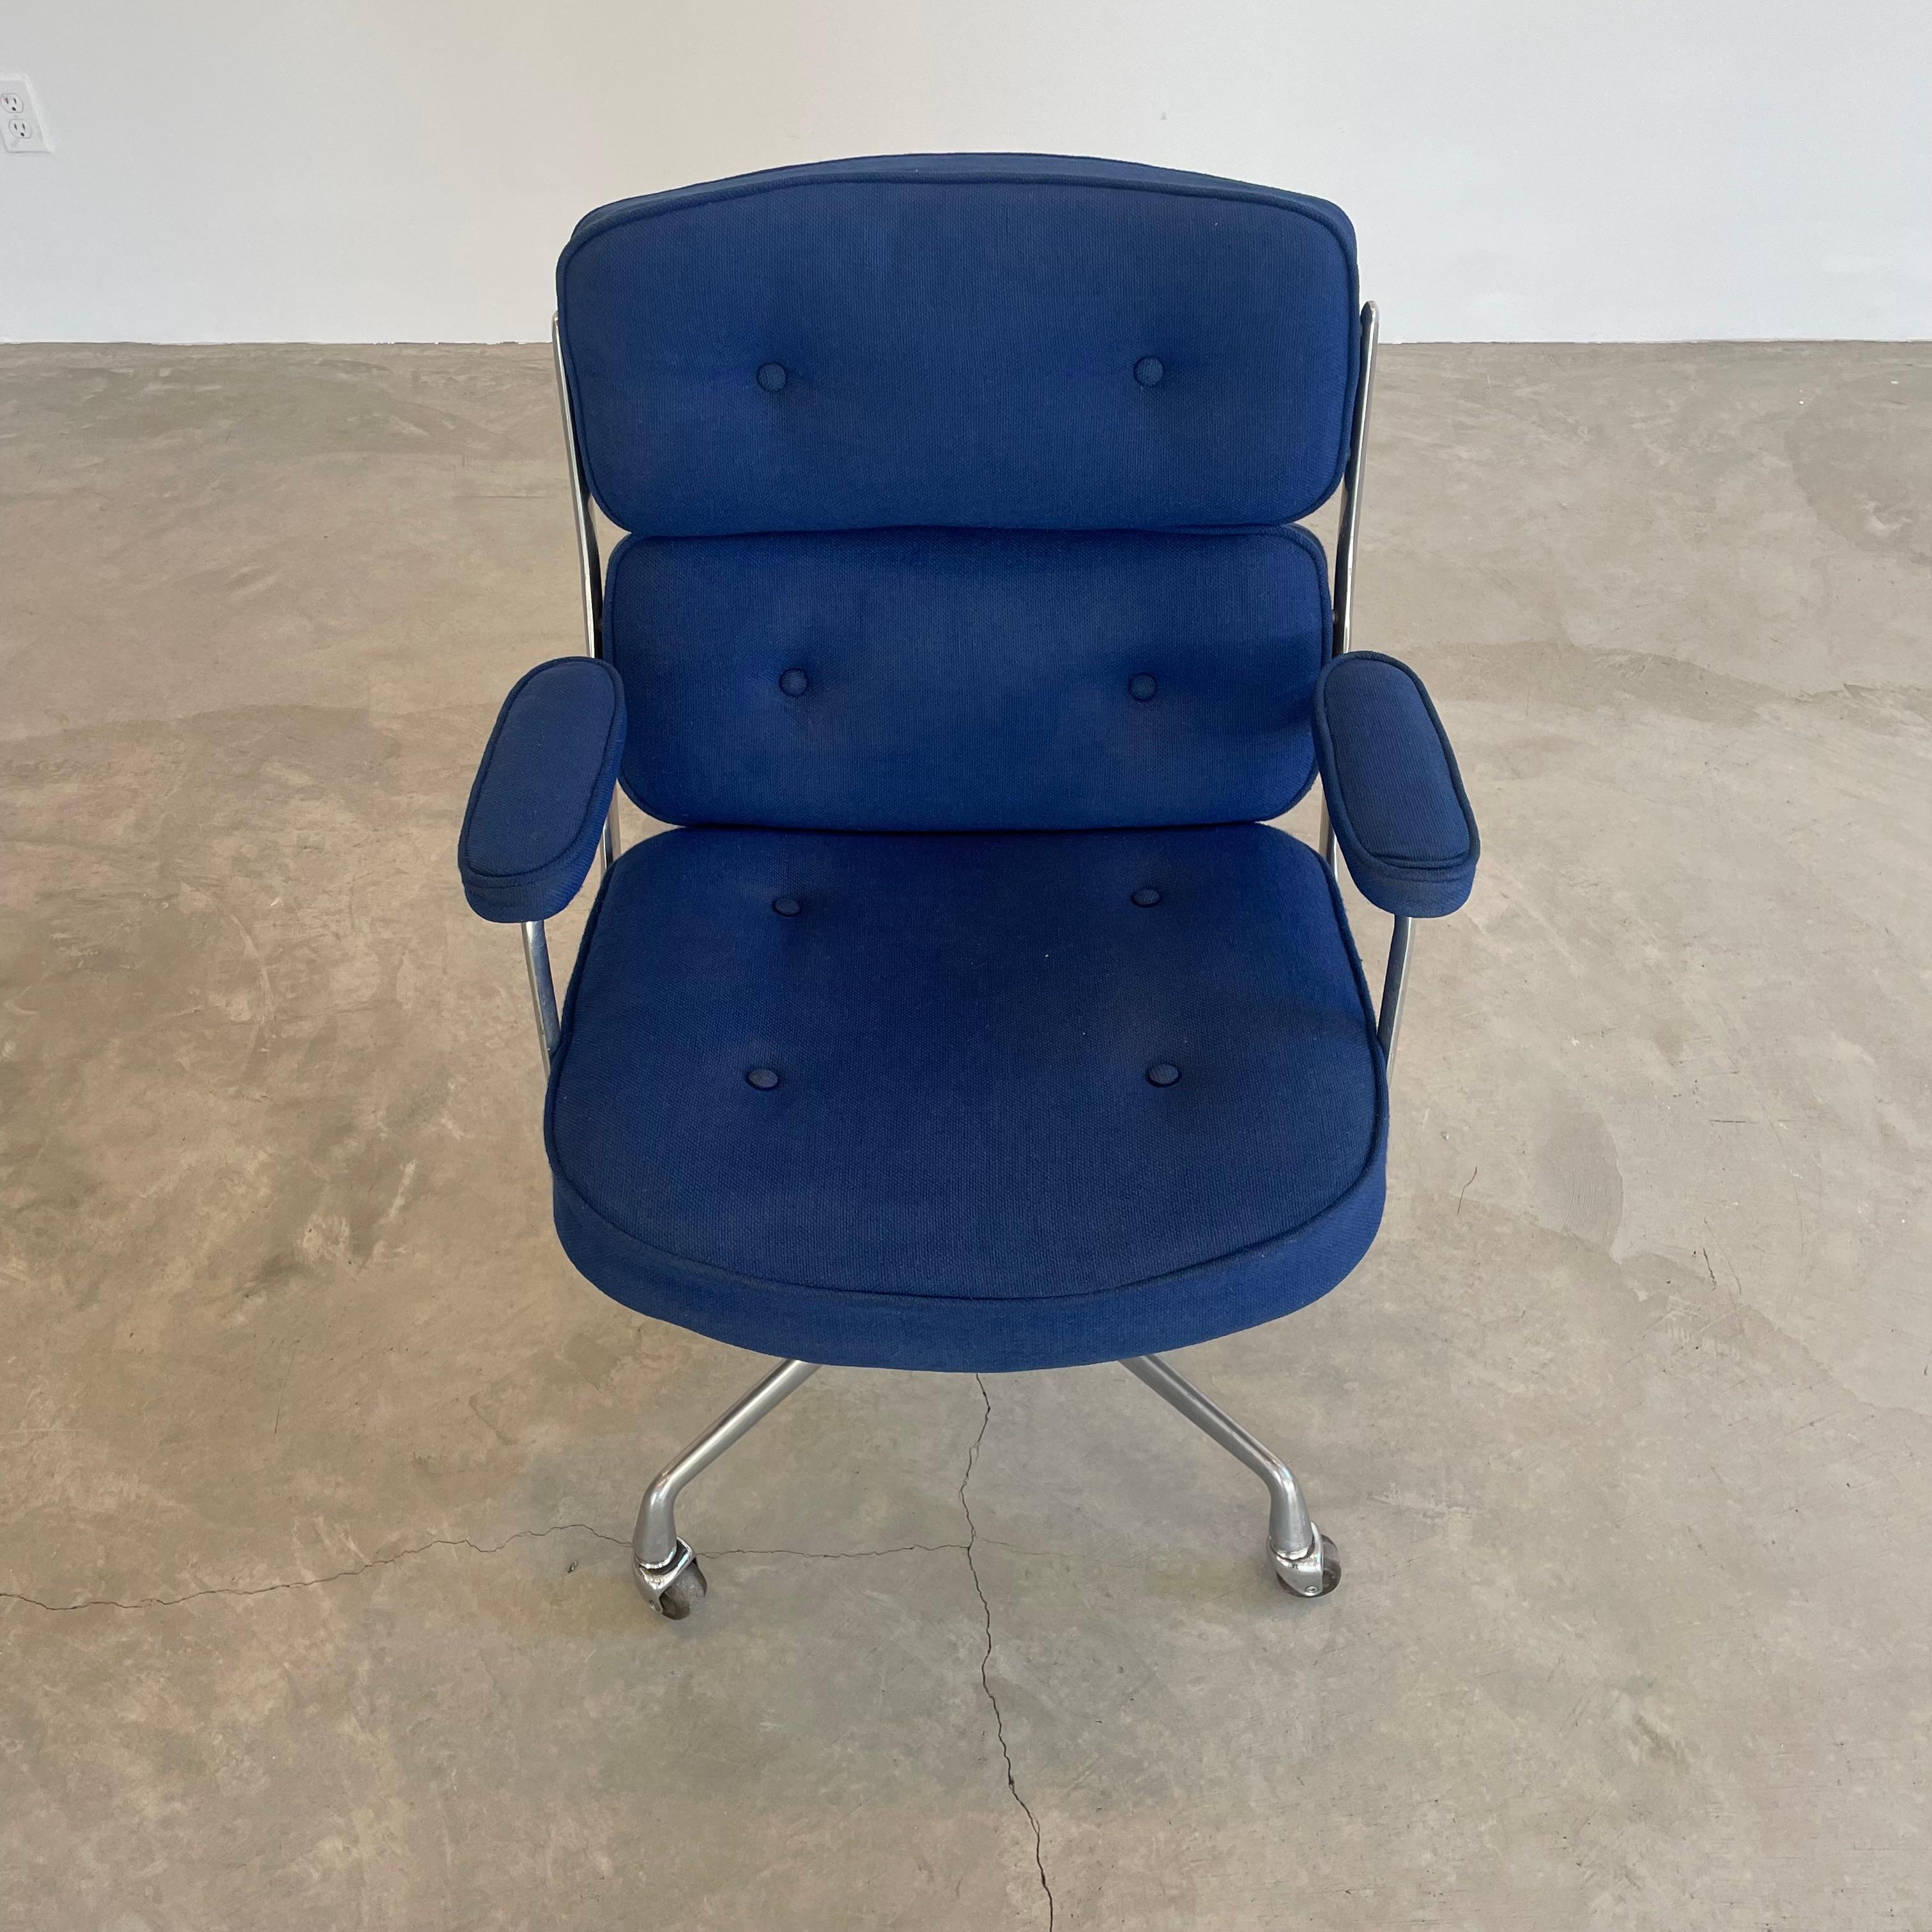 Eames Time Life Chair in Navy Blue Burlap for Herman Miller, 1978 USA For Sale 4